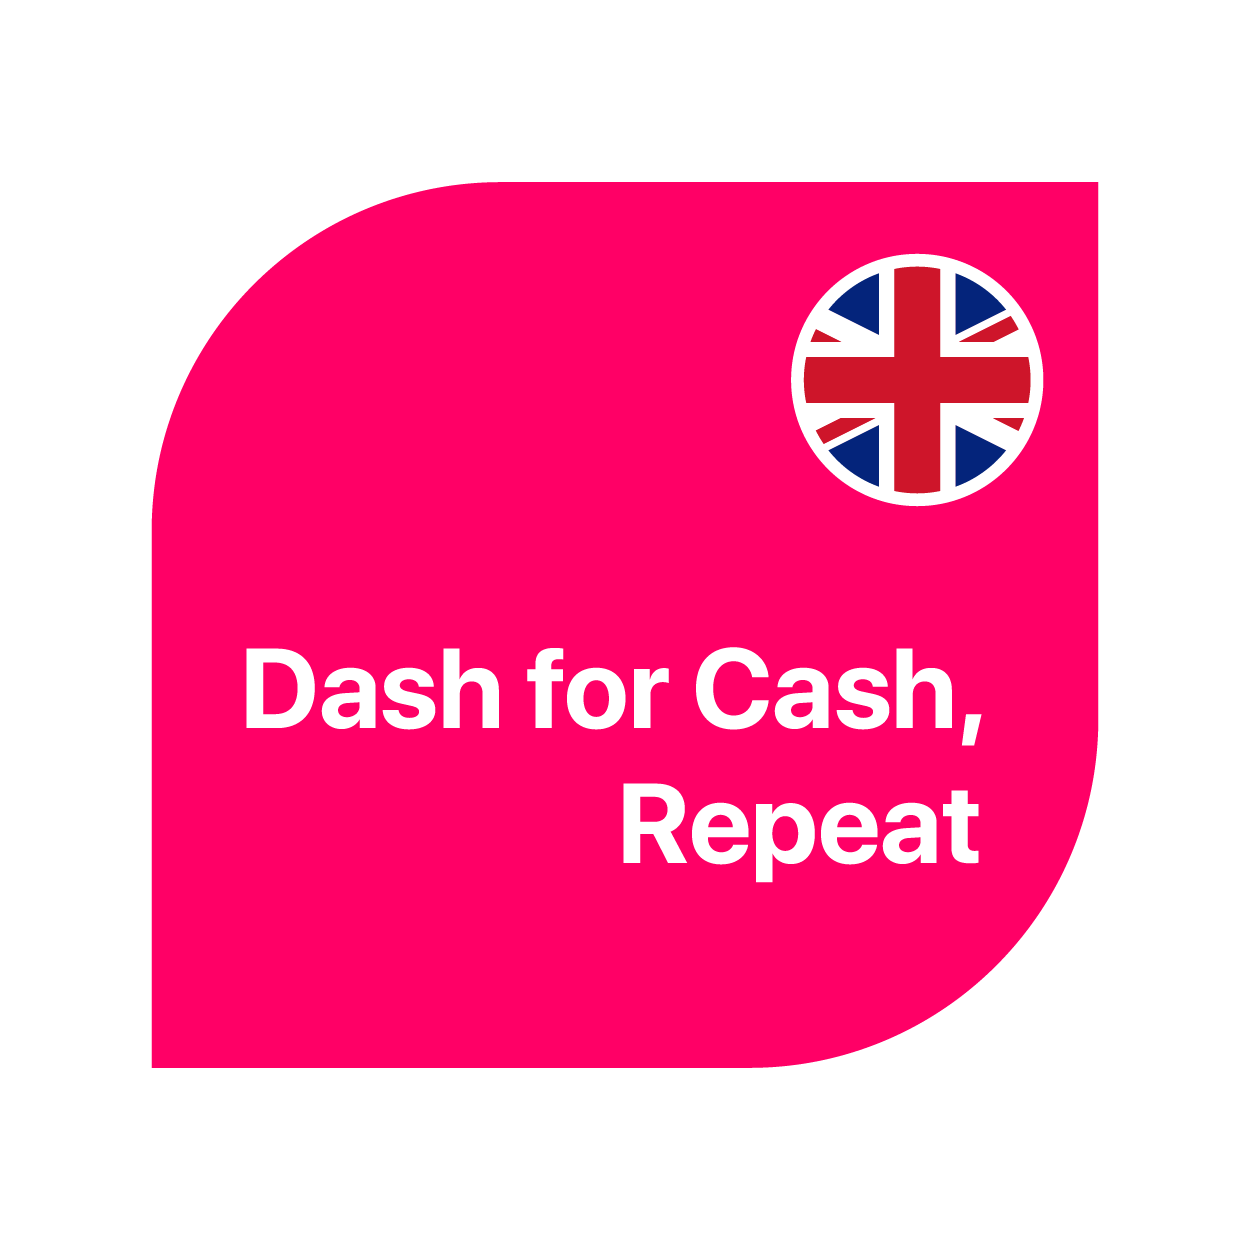 dash_for_cash_repeat_ENG_Tavola_disegno_1.png